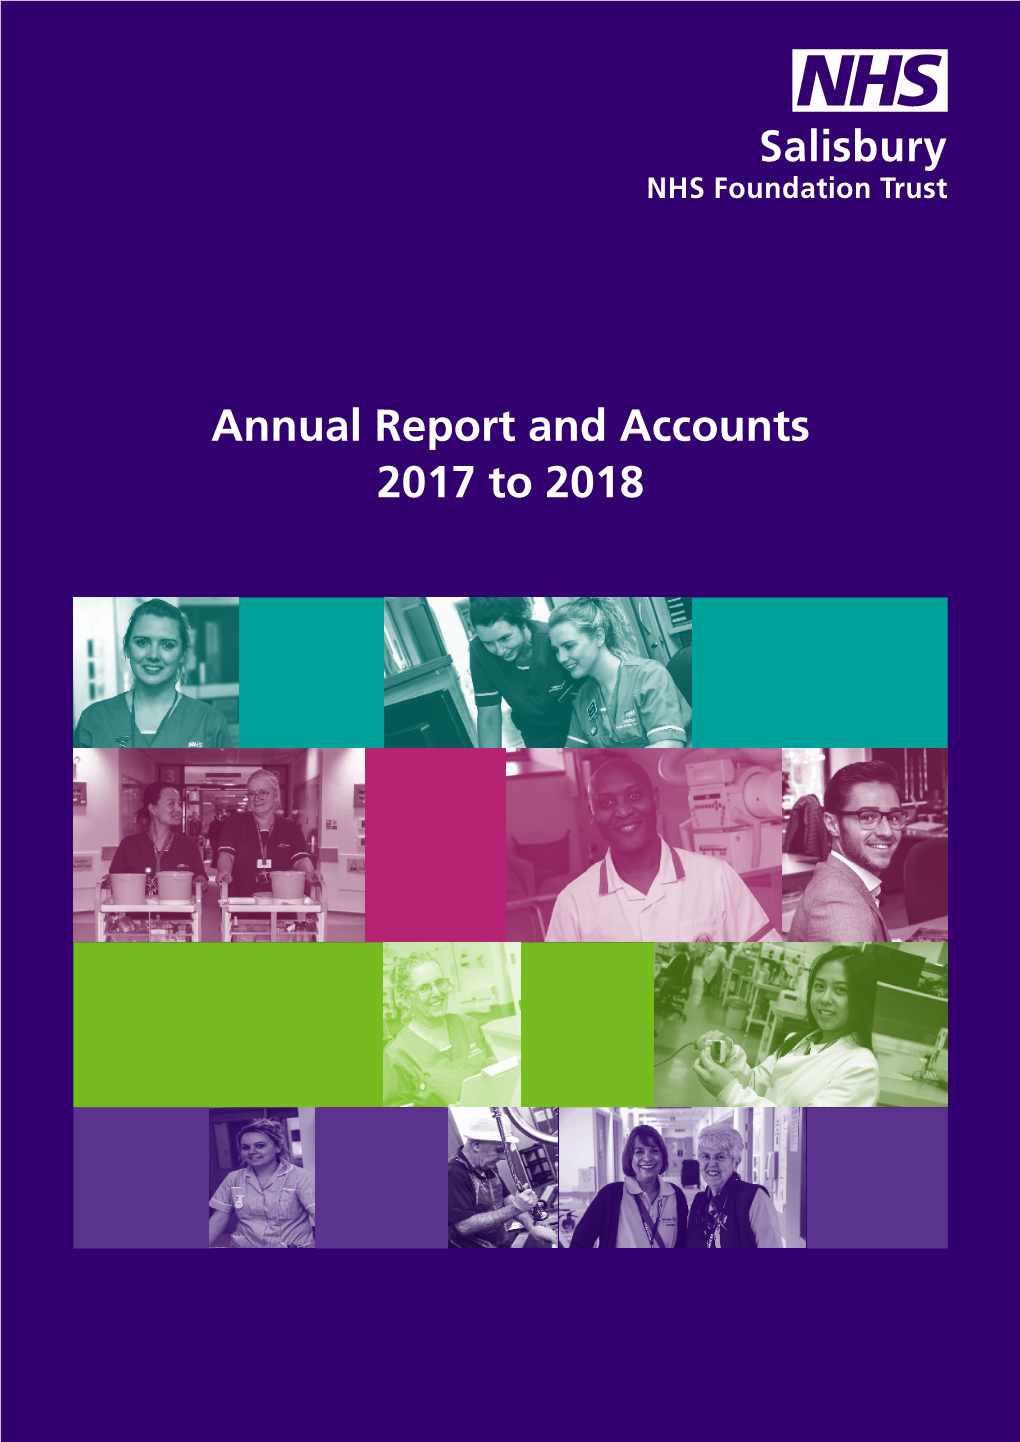 Annual Report and Accounts 2017 to 2018